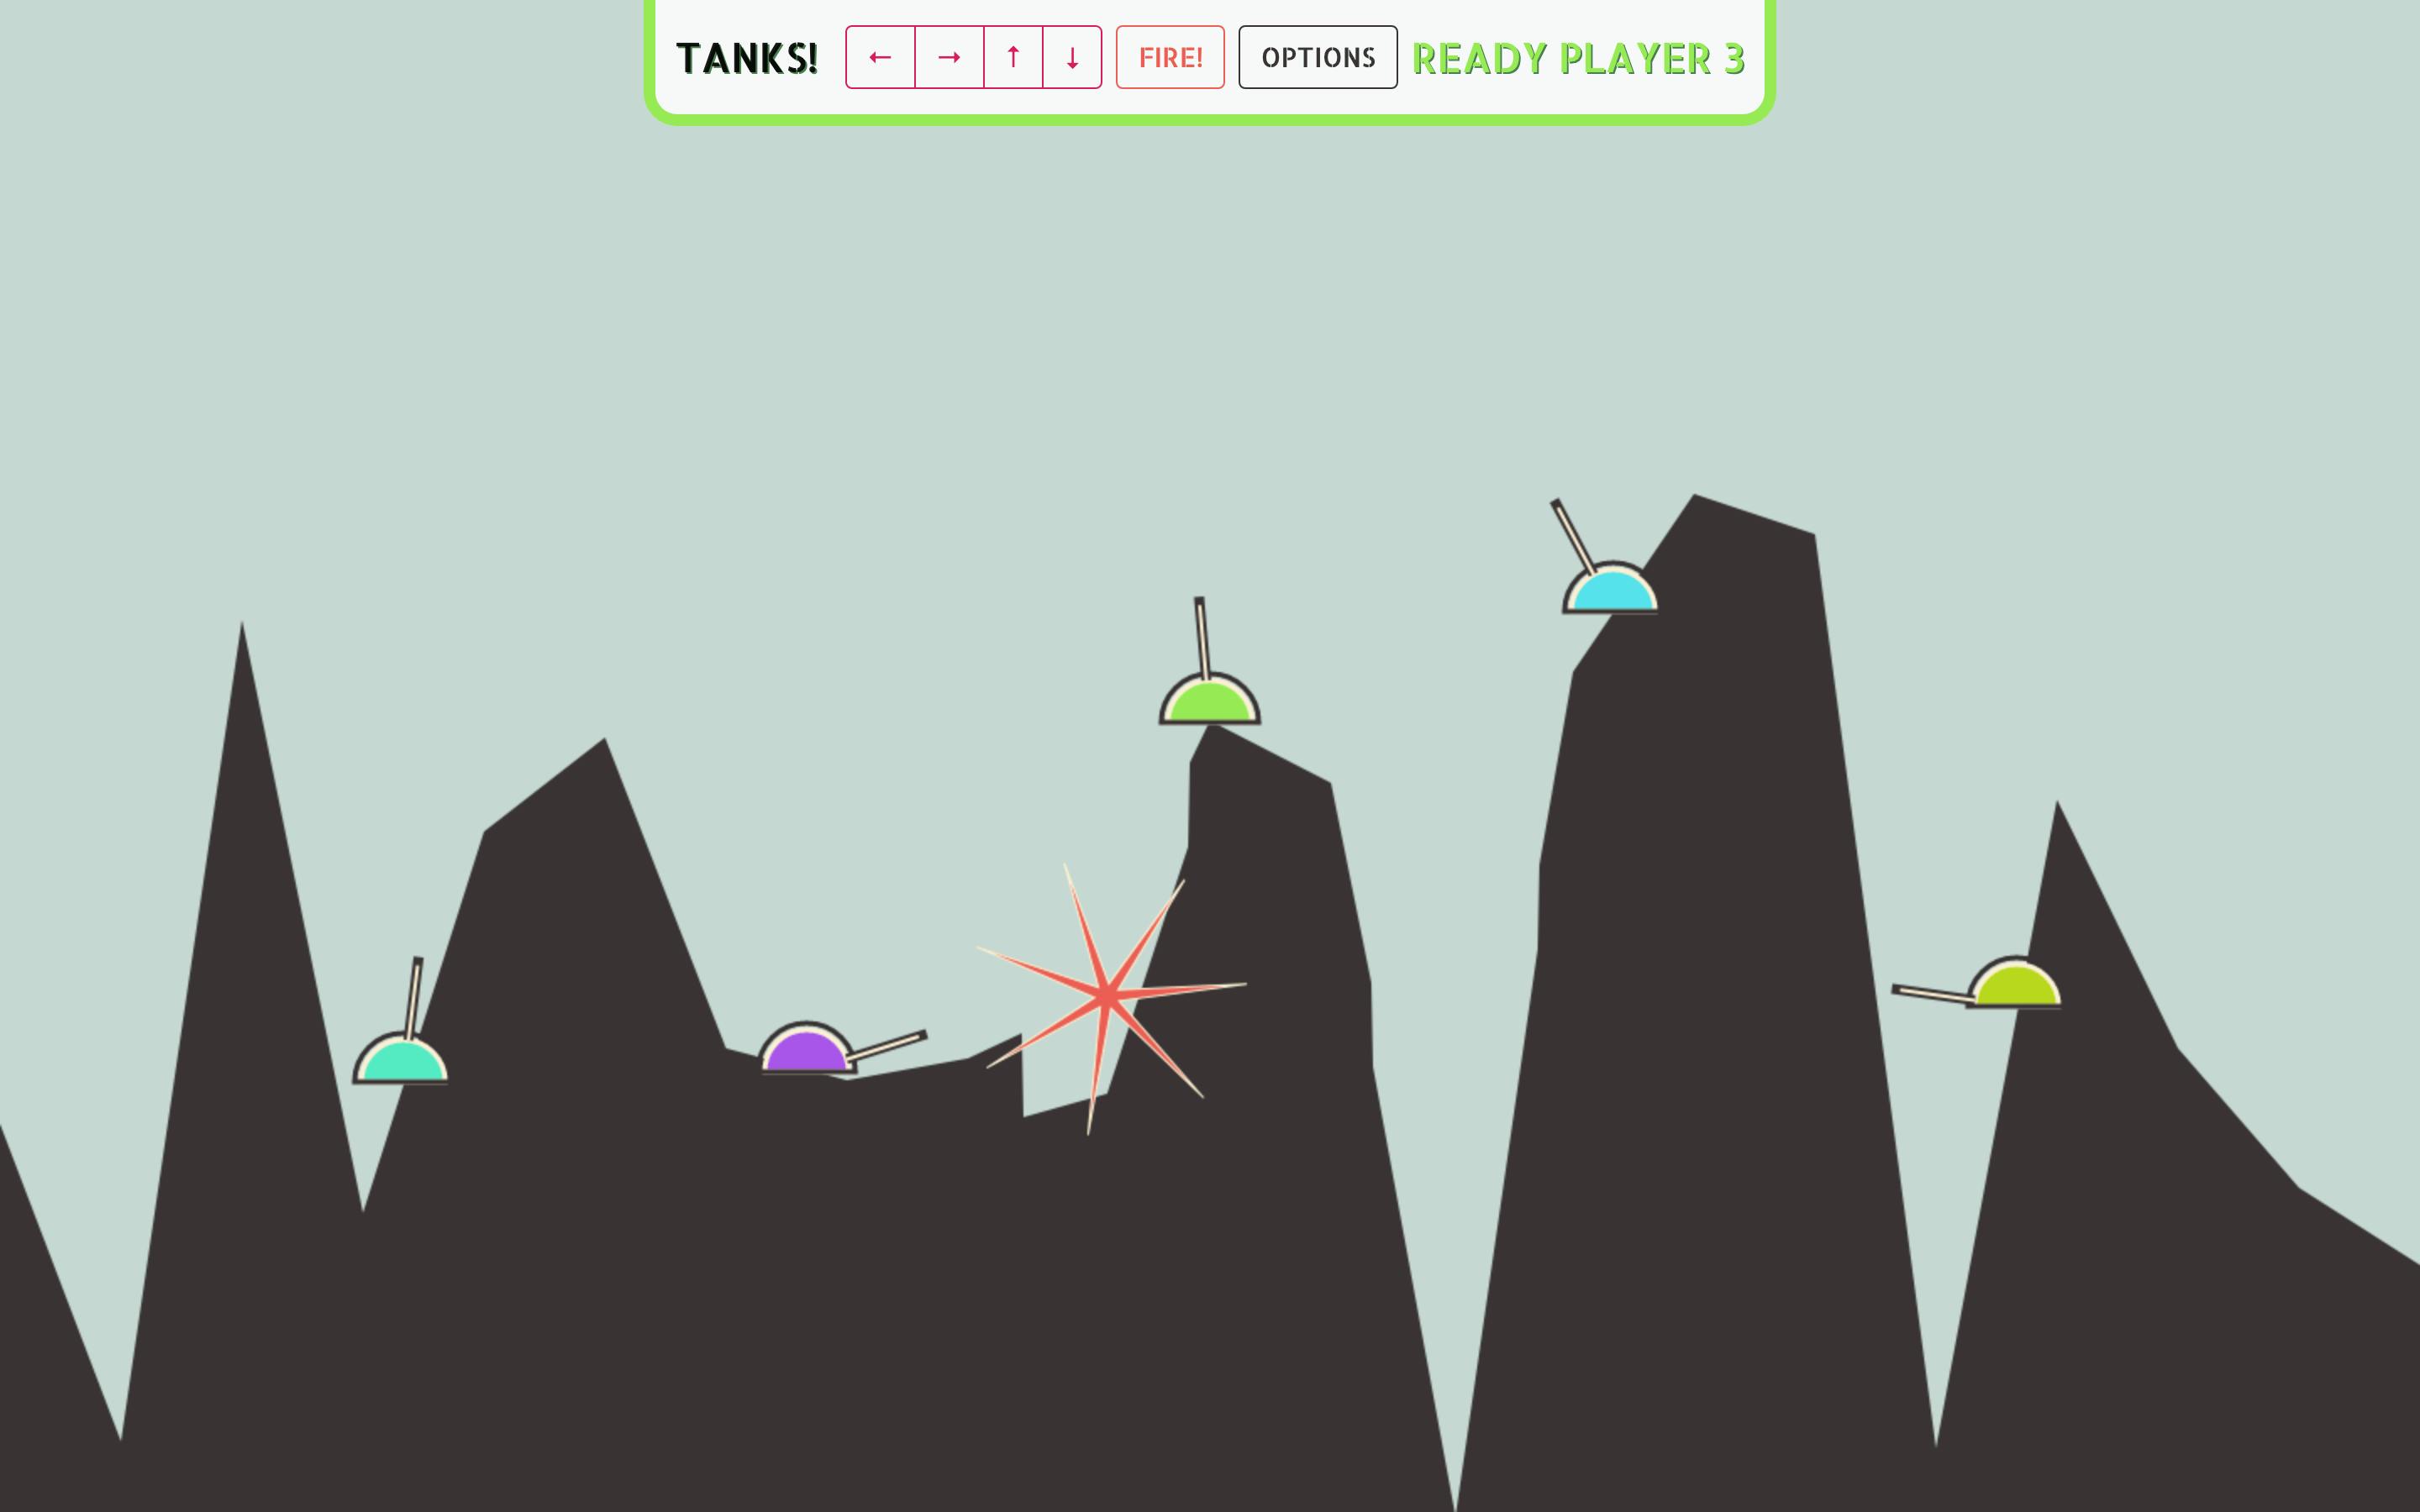 Early screenshot showing a tank exploding in multiplayer mode